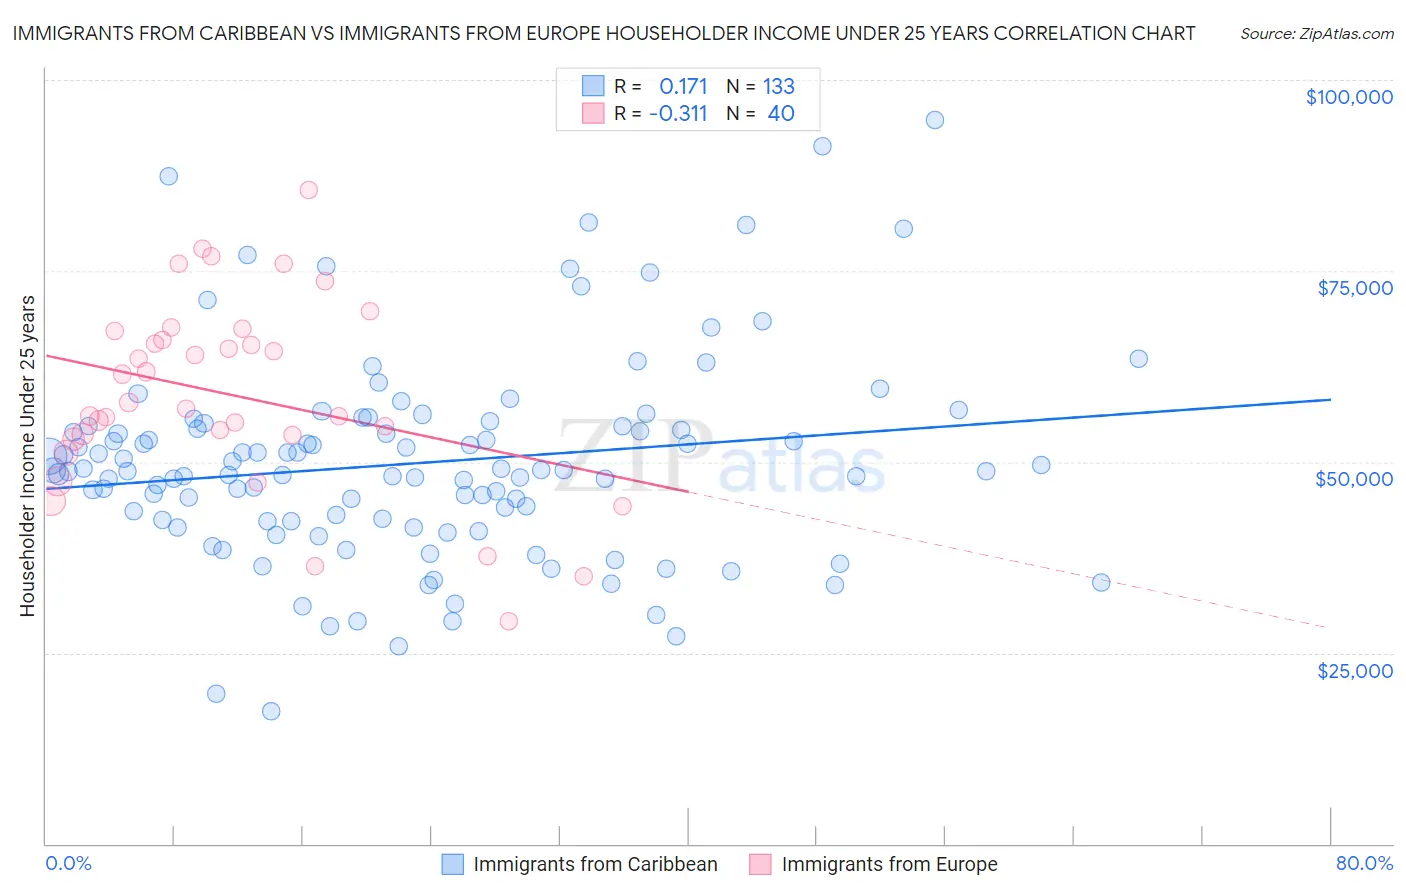 Immigrants from Caribbean vs Immigrants from Europe Householder Income Under 25 years